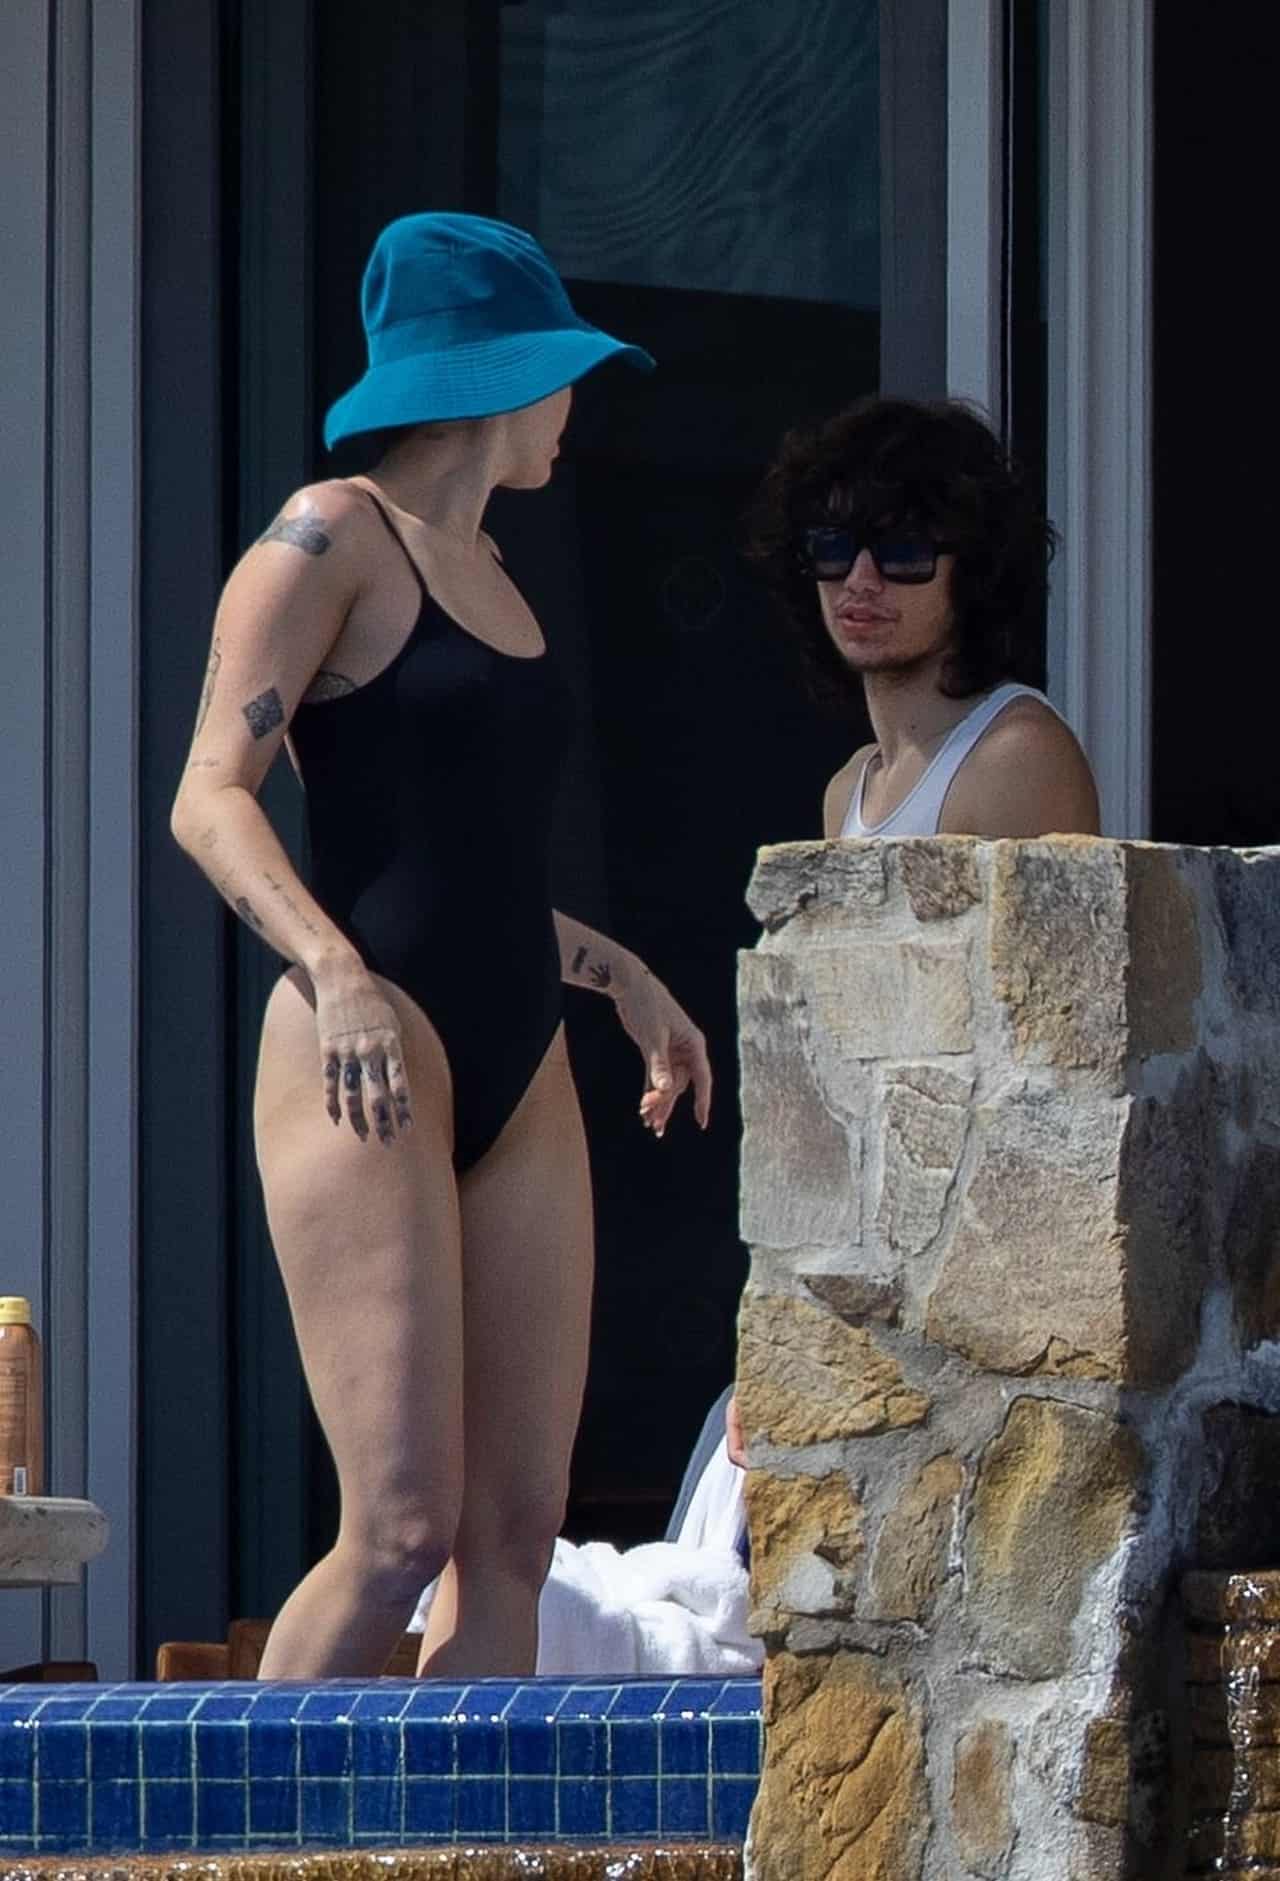 Miley Cyrus Shows Off Toned Legs in Black One-Piece in Cabo San Lucas